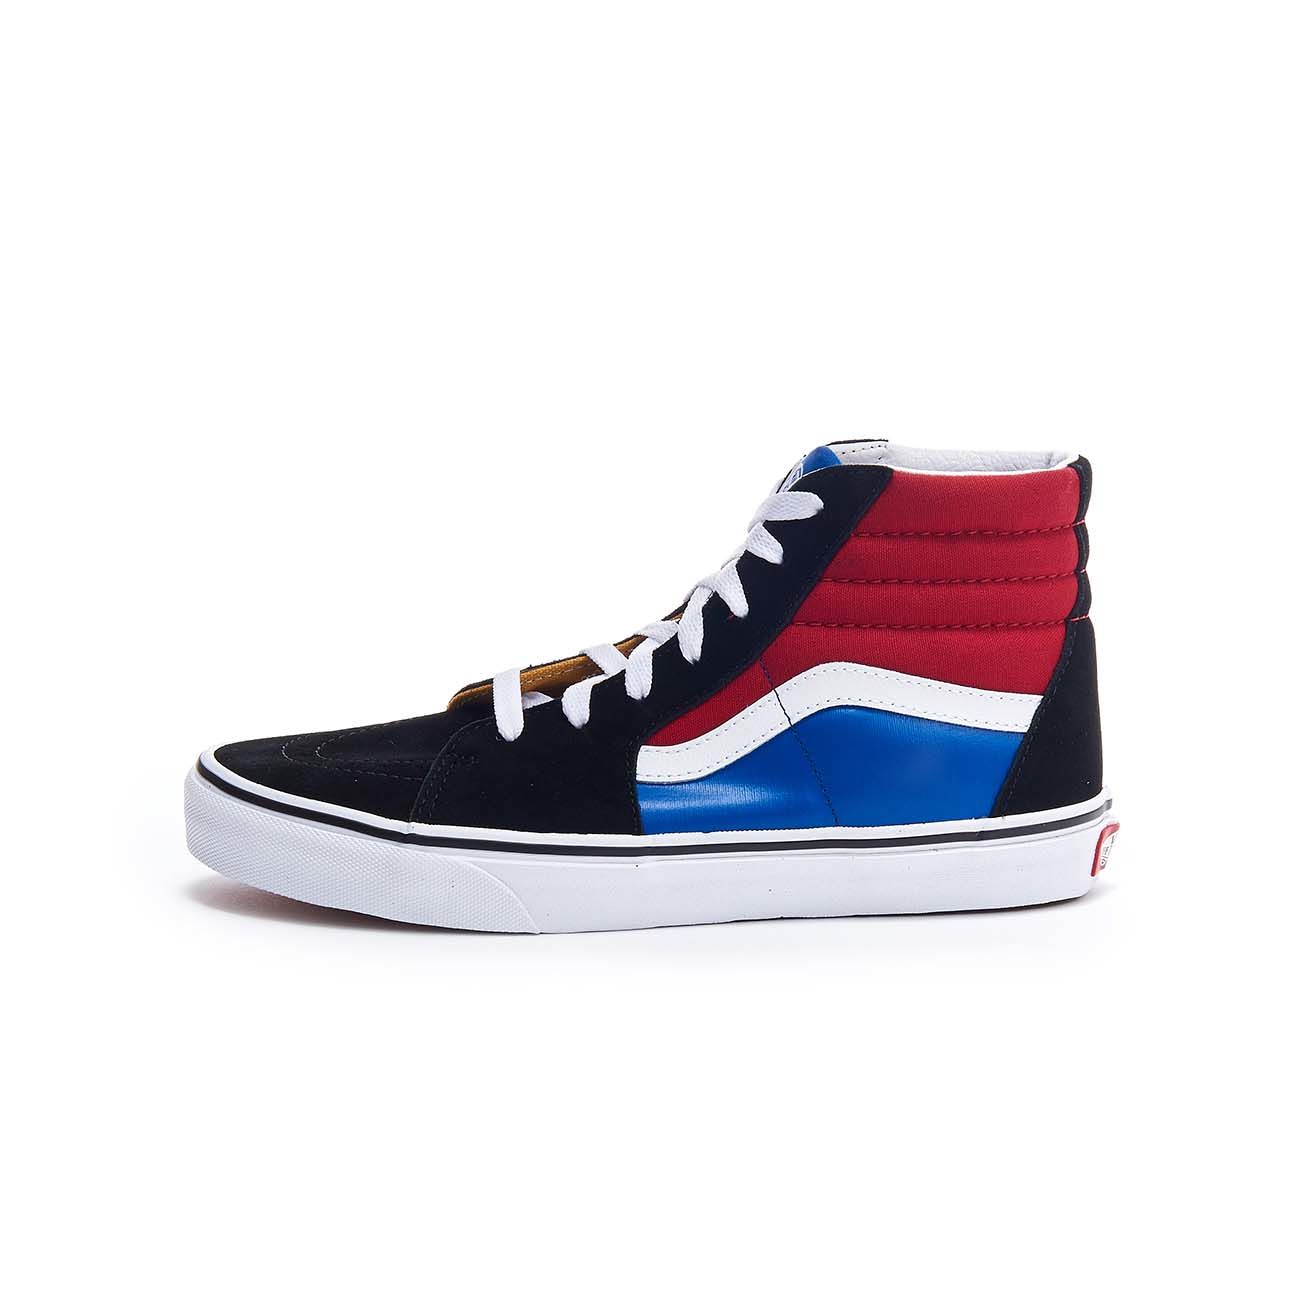 Mascheroni FABRIC VANS SK8-HI | Kid SNEAKER Store Black AND Chilli ECO-LEATHER Pepper IN HIGH